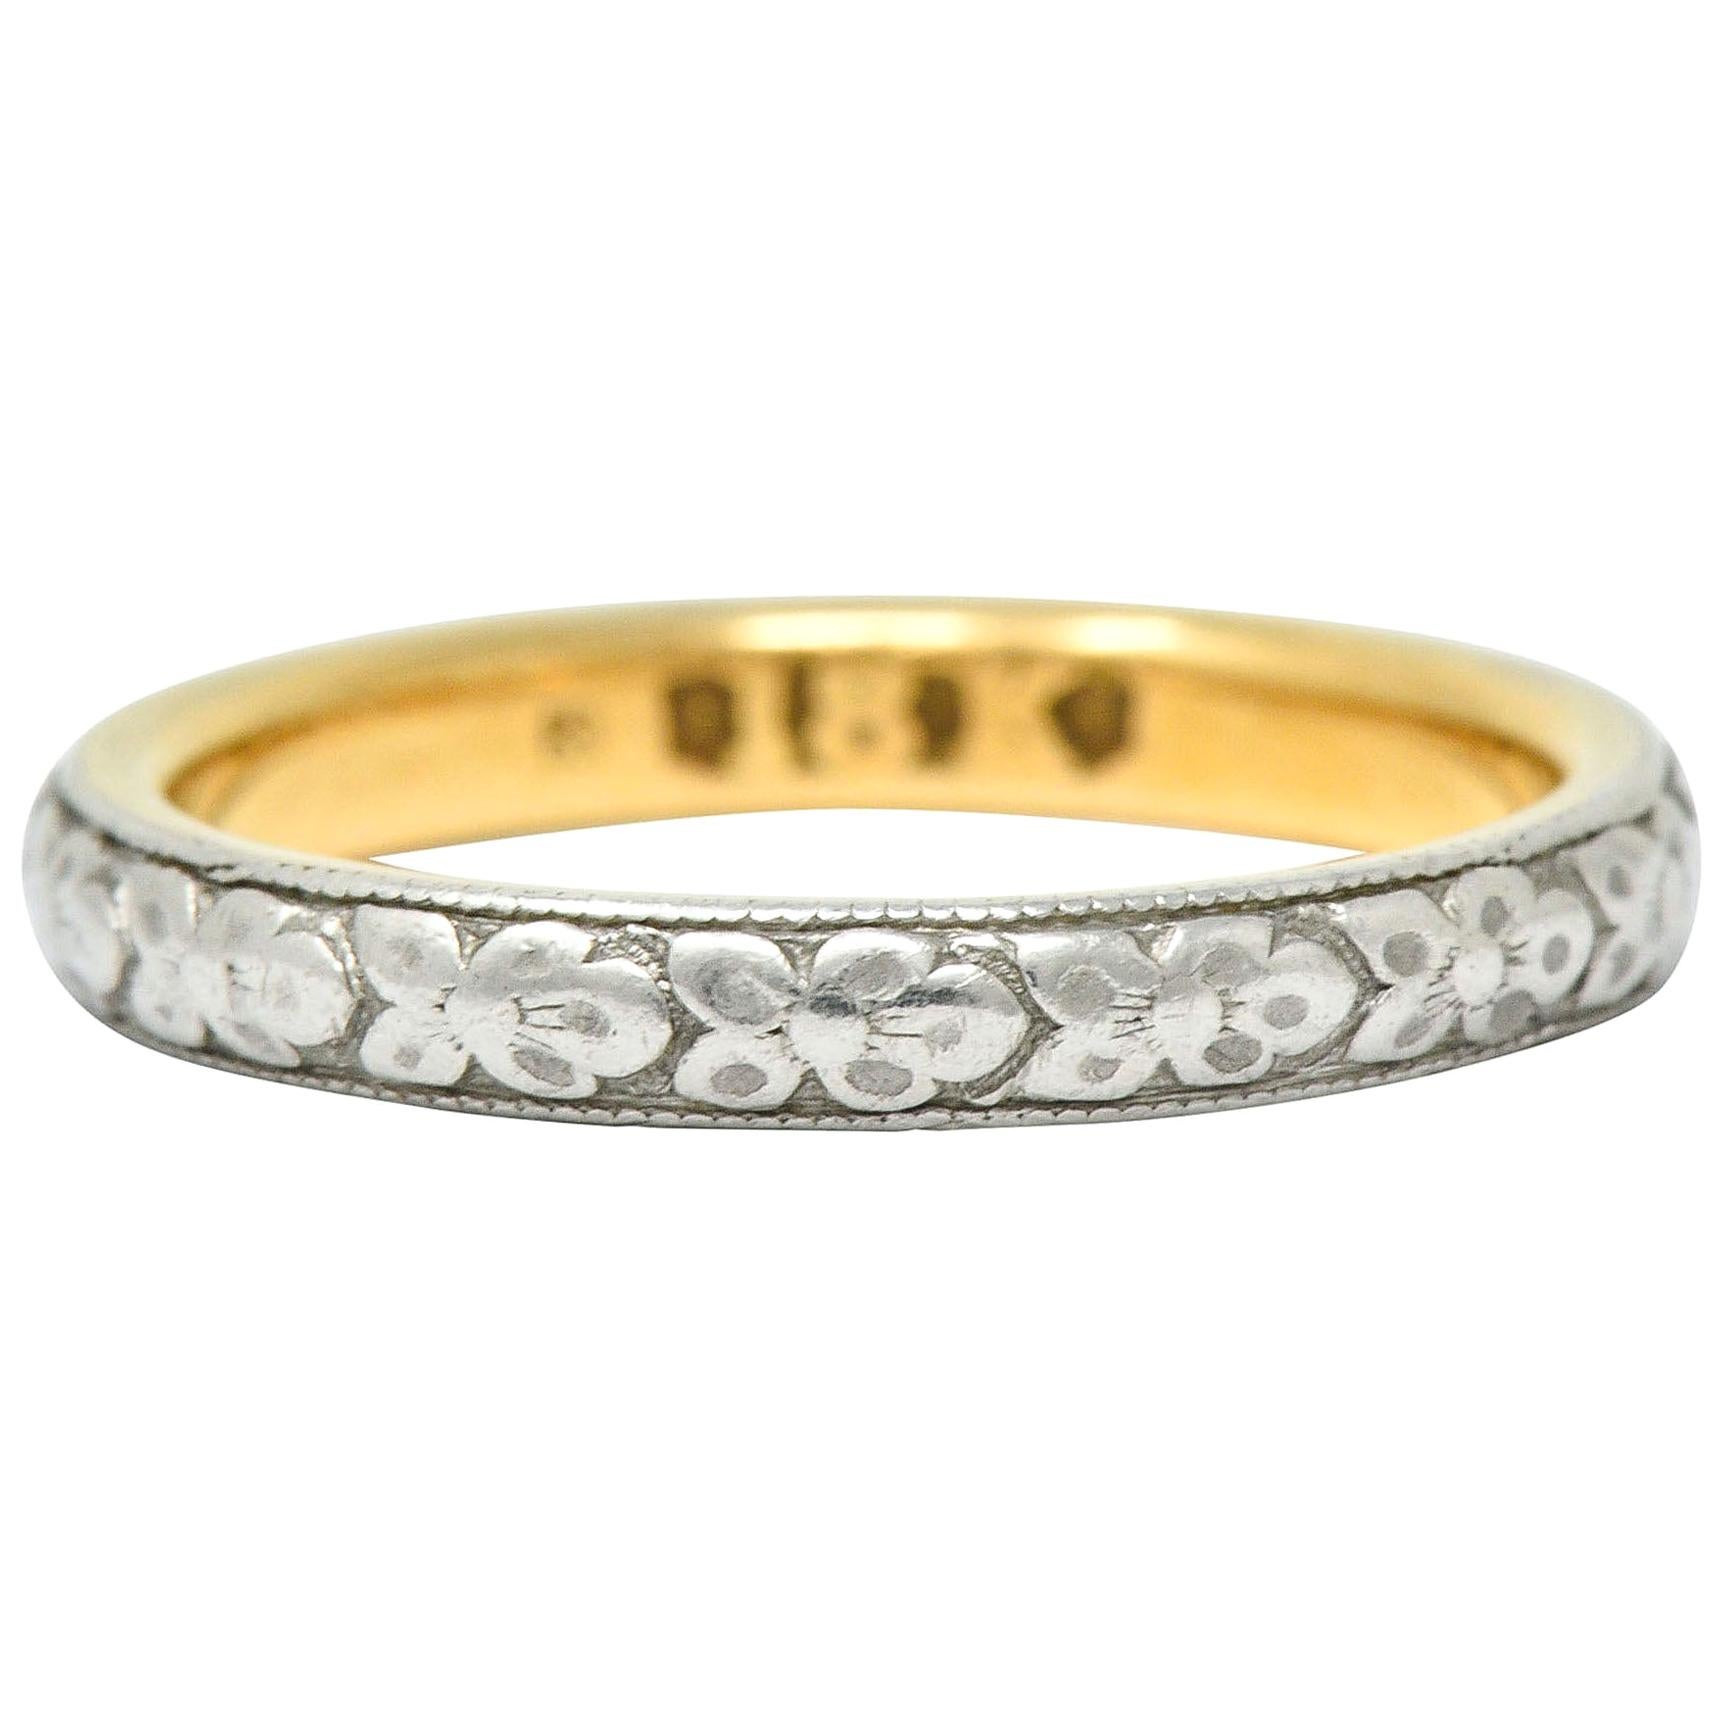 Early Art Deco Platinum-Topped 18 Karat Two-Tone Gold Floral Band Ring